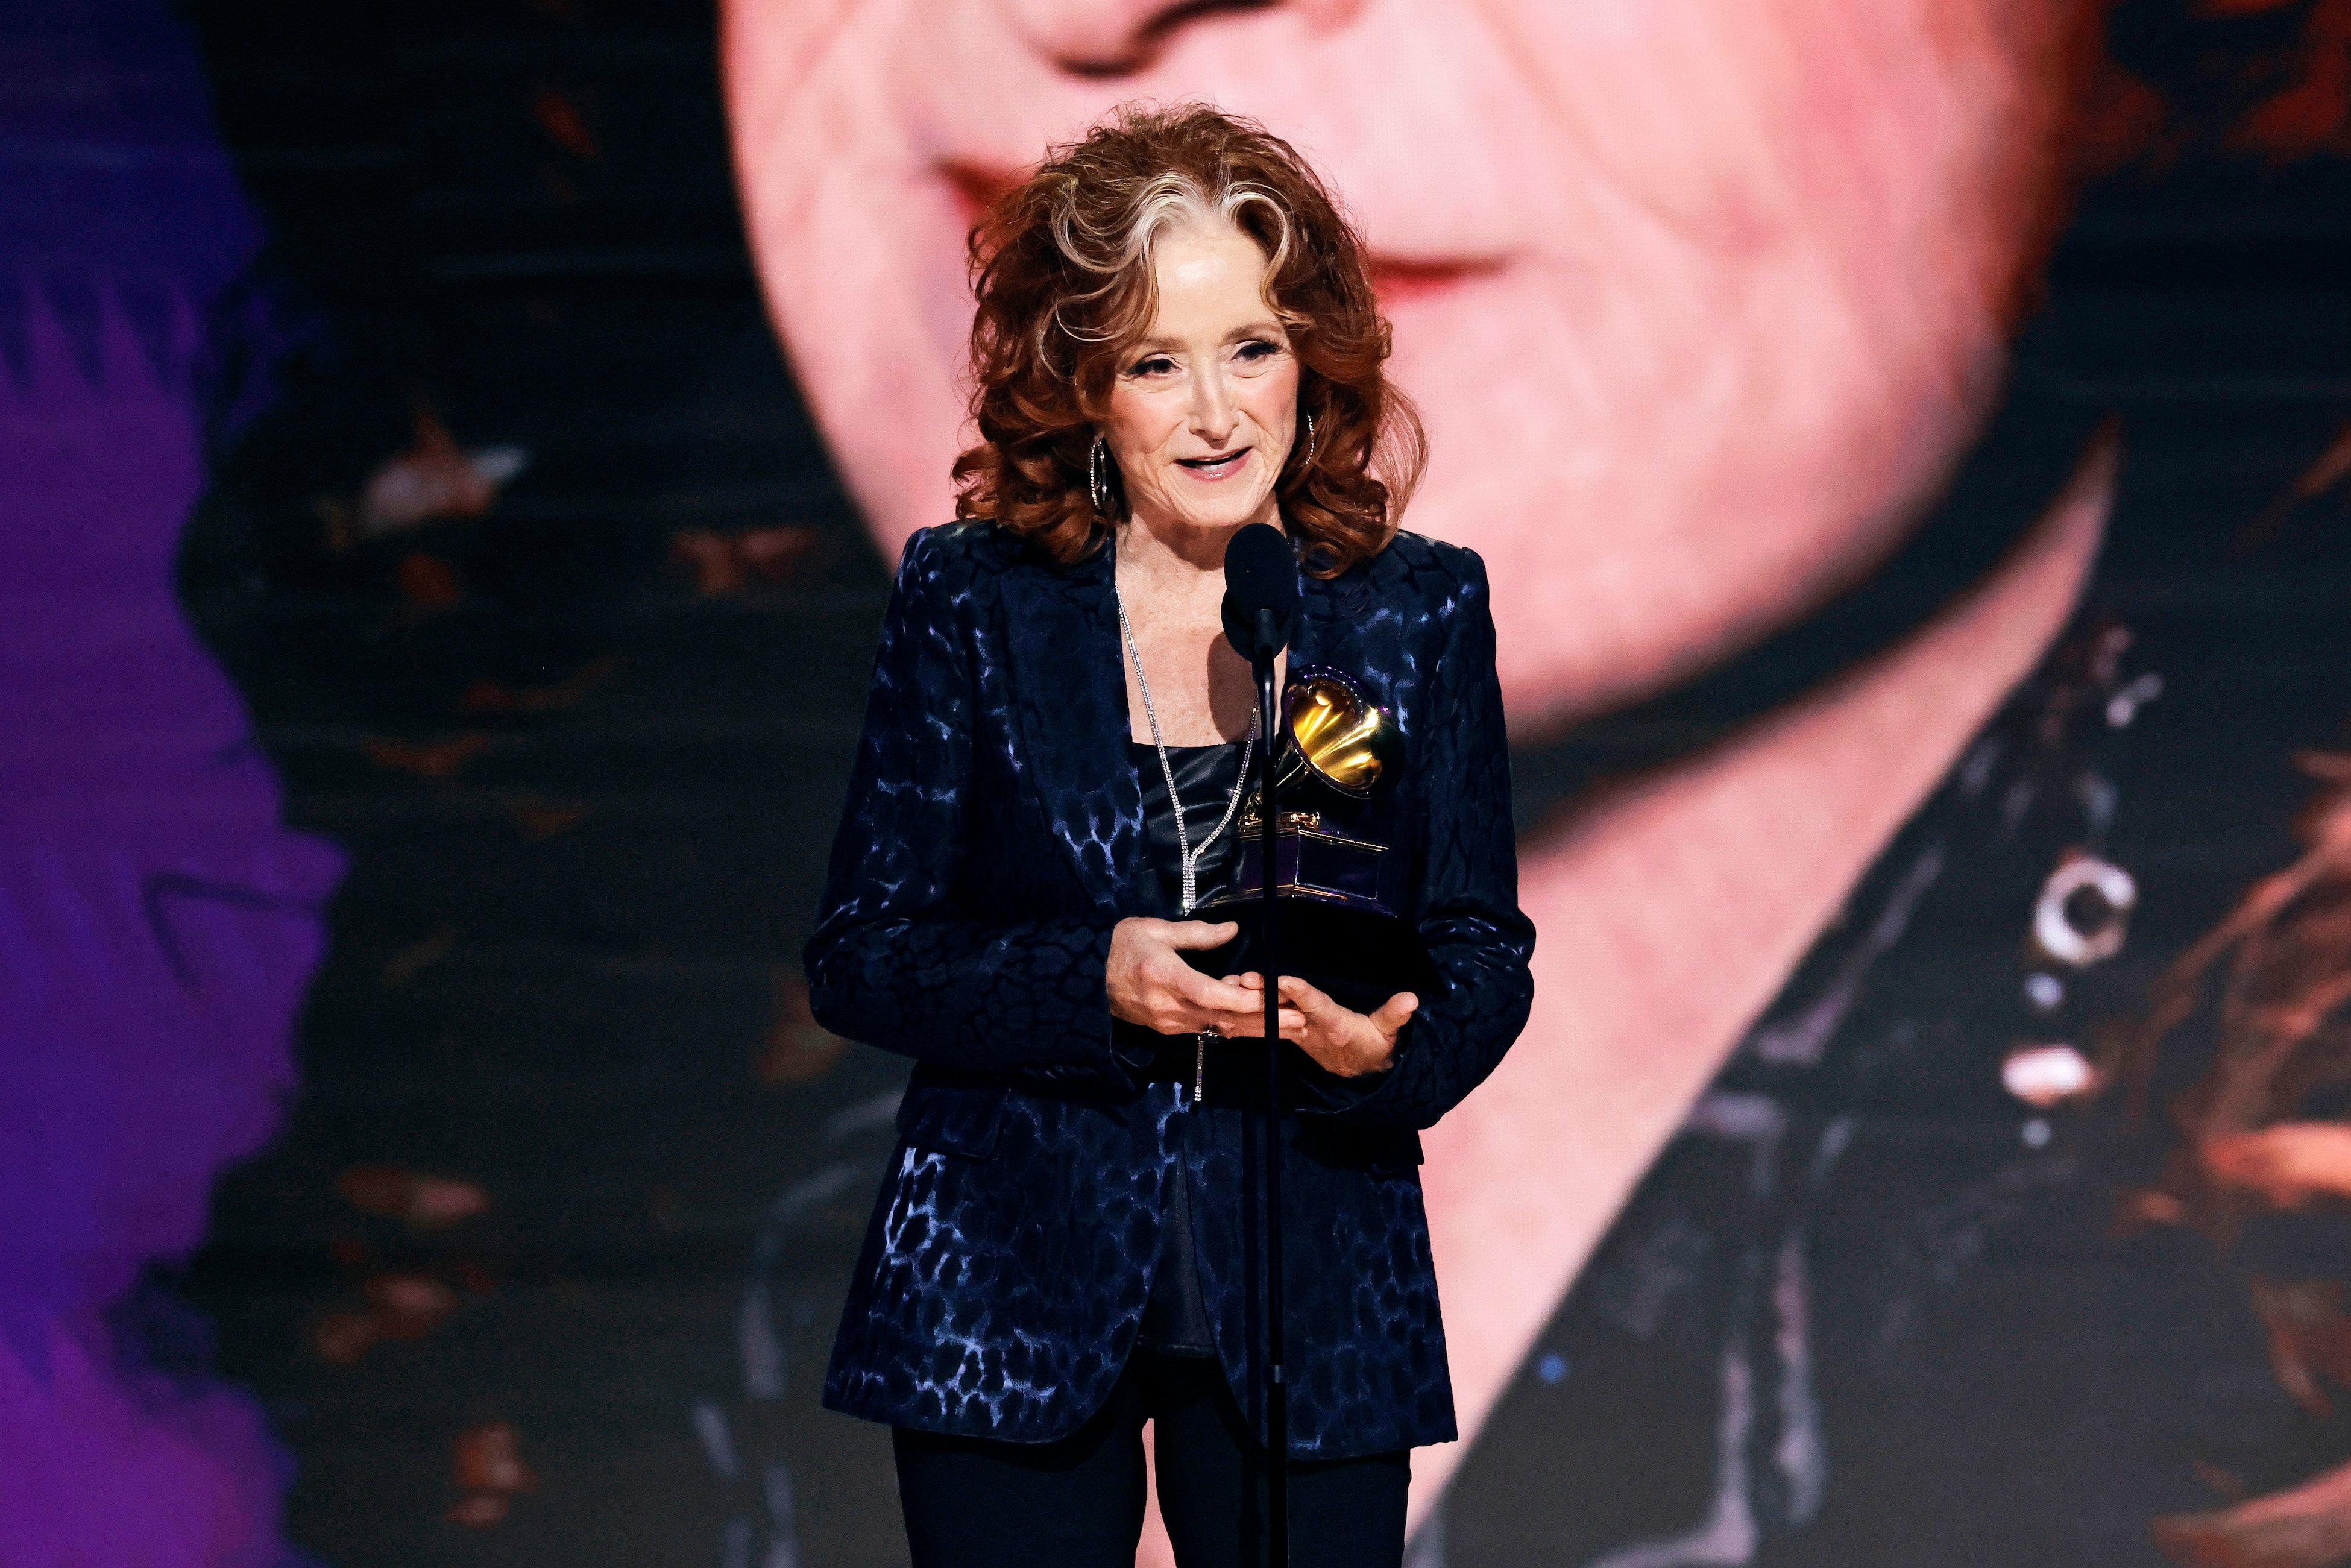 Photo of Bonnie Raitt winning the GRAMMY for Song Of The Year at the 2023 GRAMMYs.